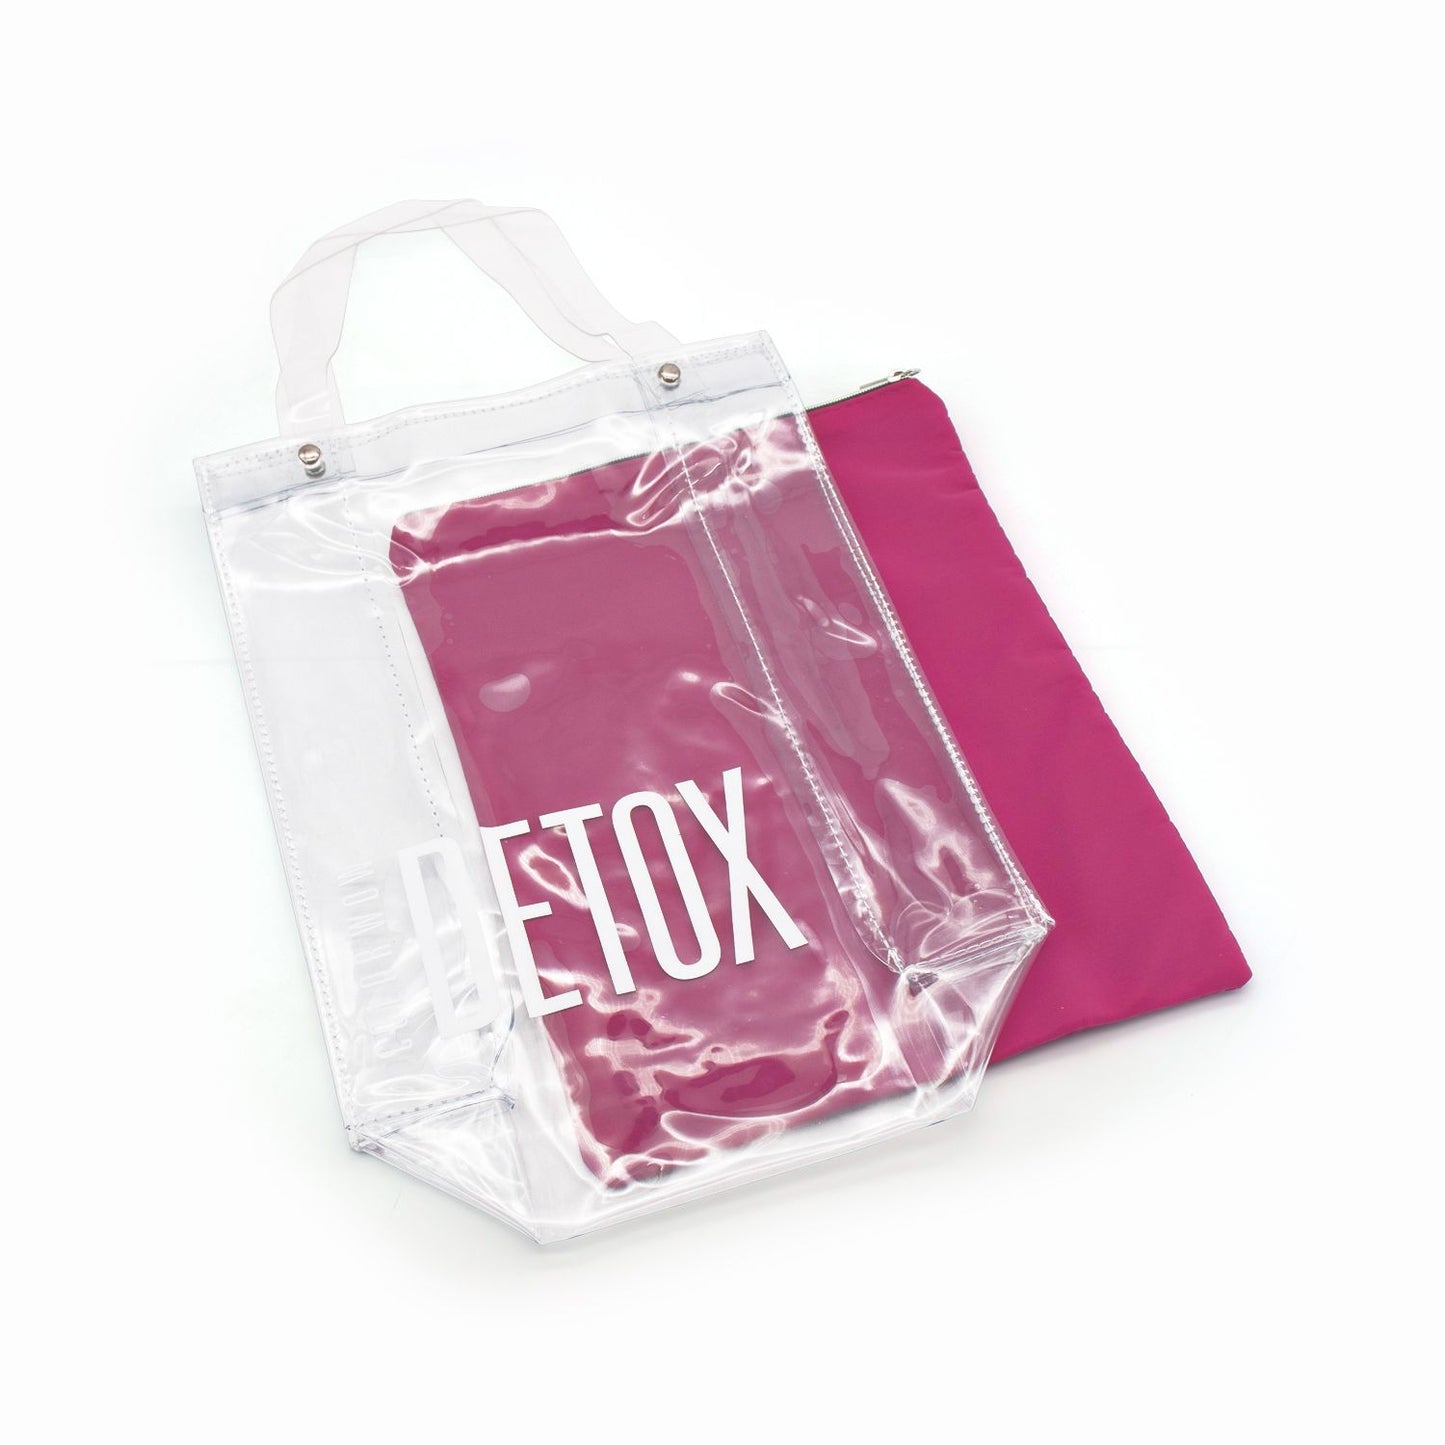 Color Wow Detox PVC Kit Bag Pink - Imperfect Container